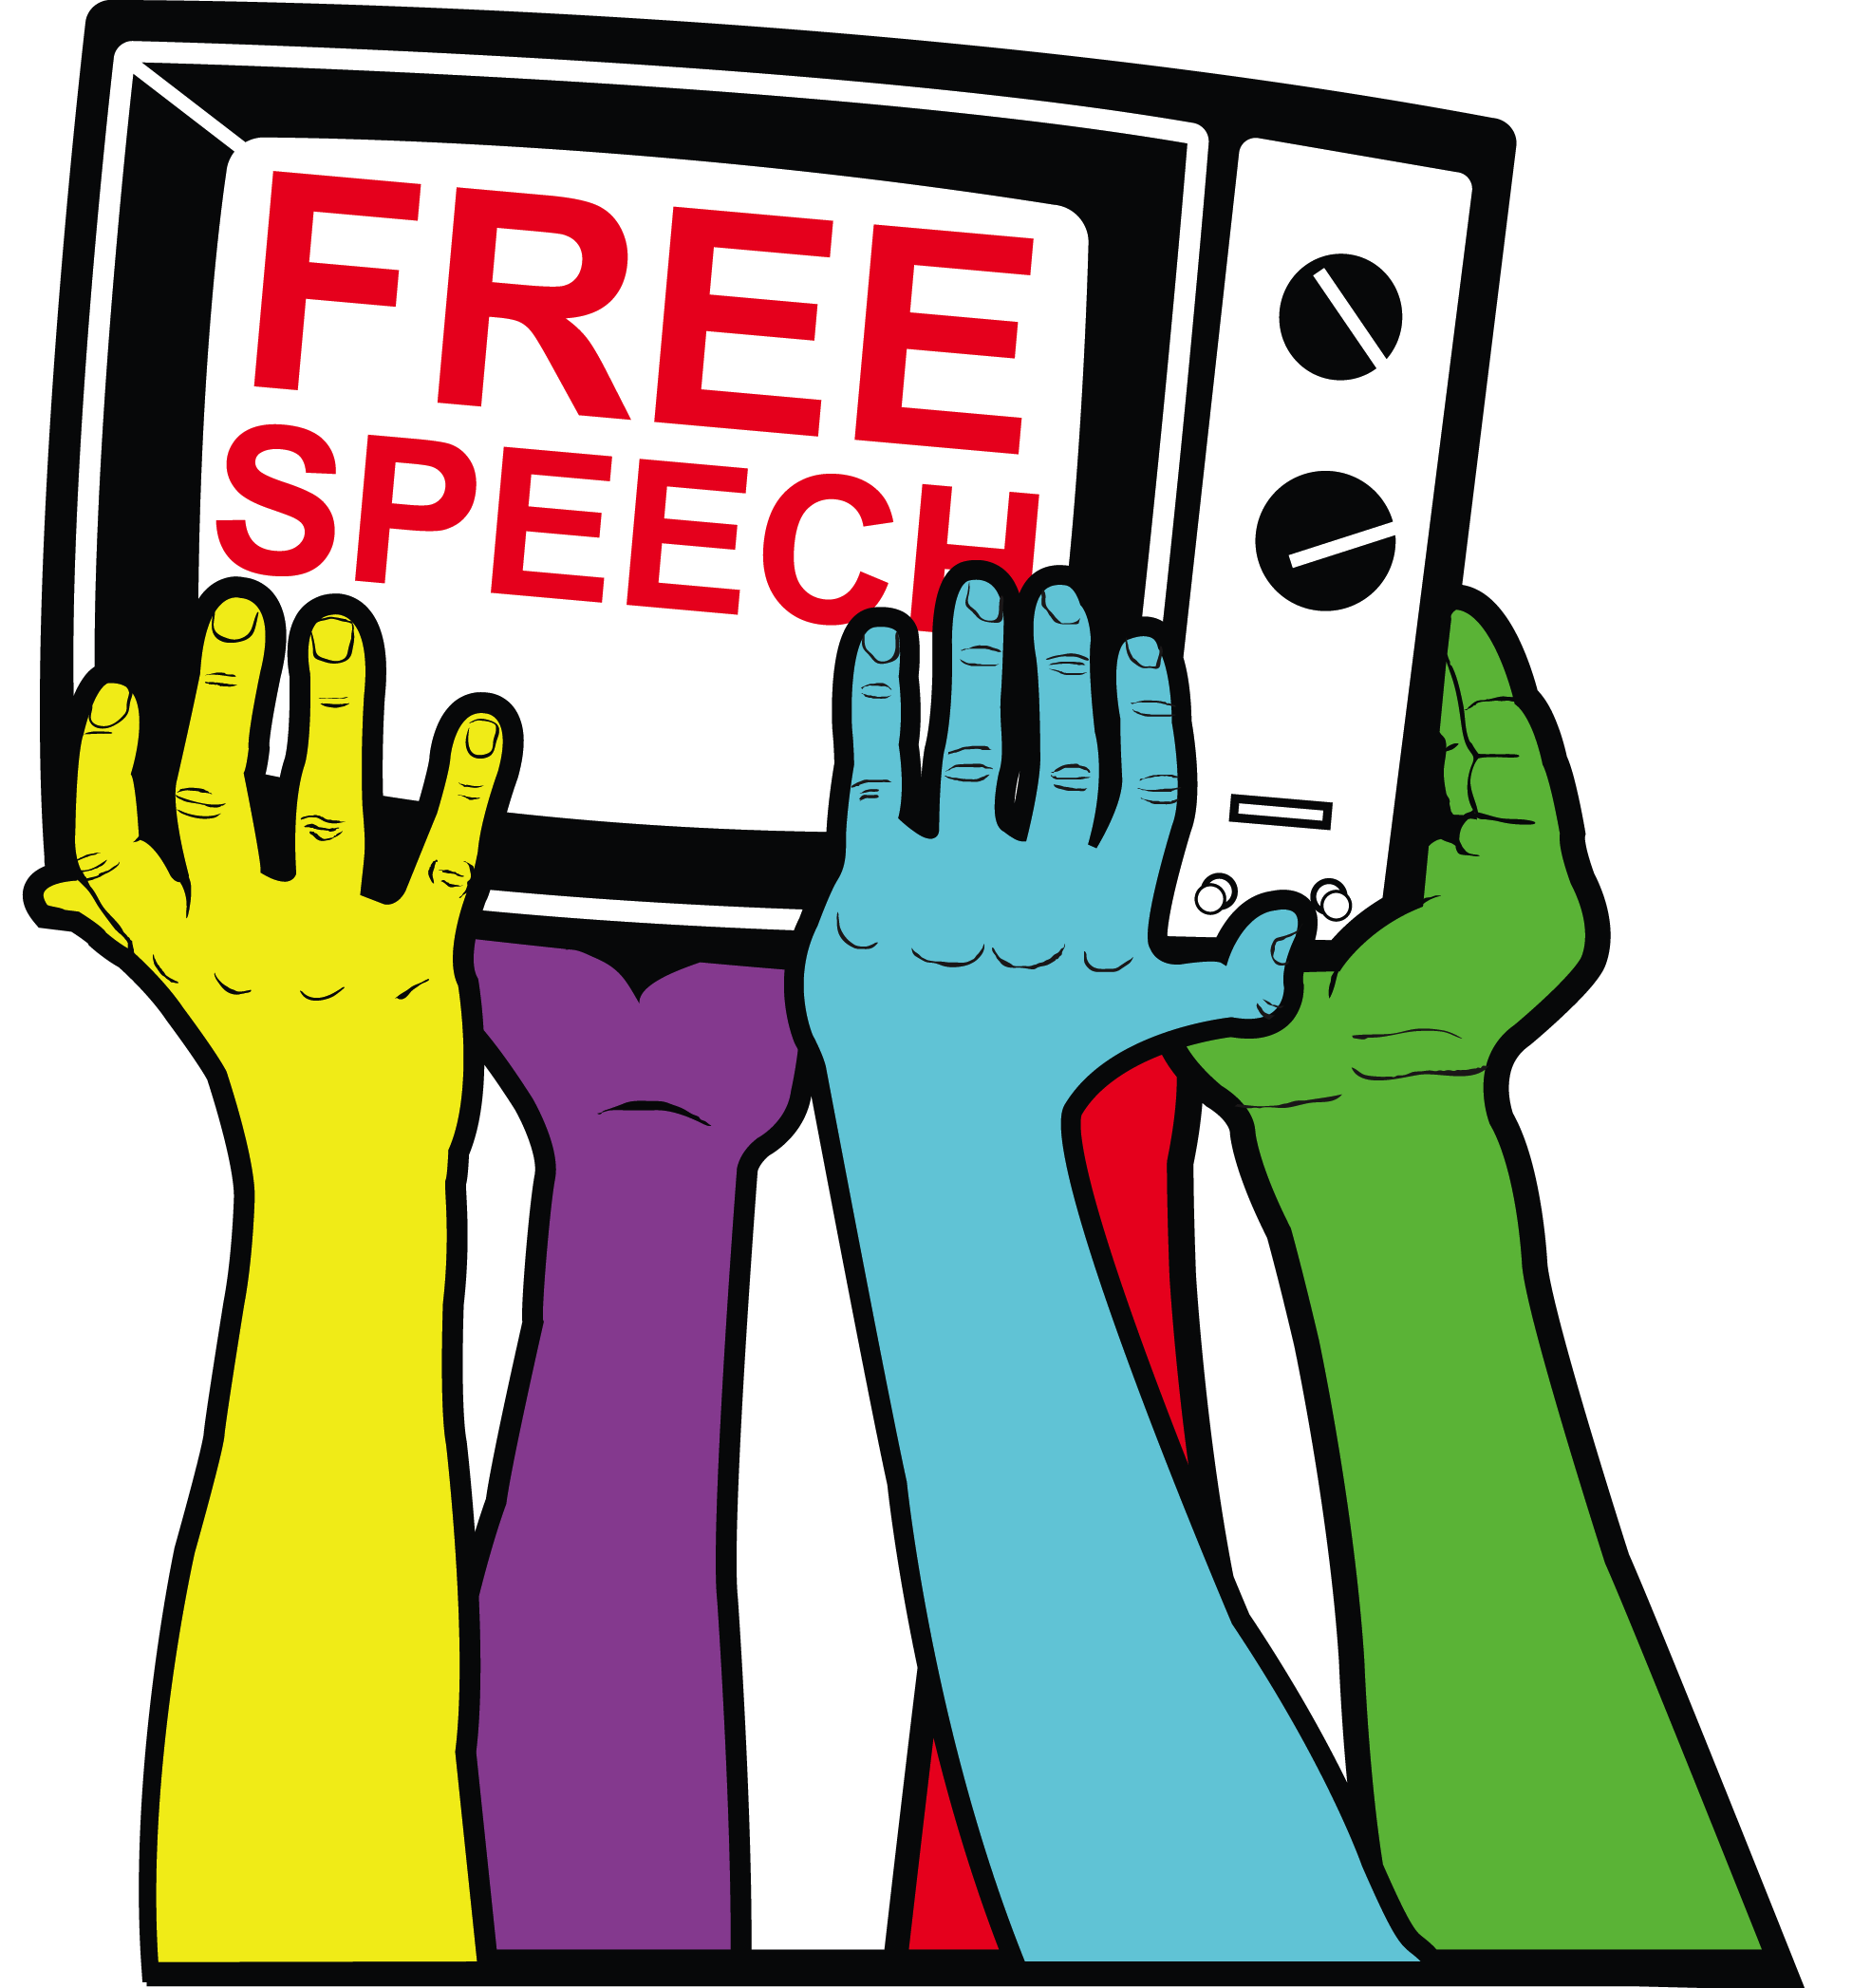 Freedom Of Speech PNG HD - 127118